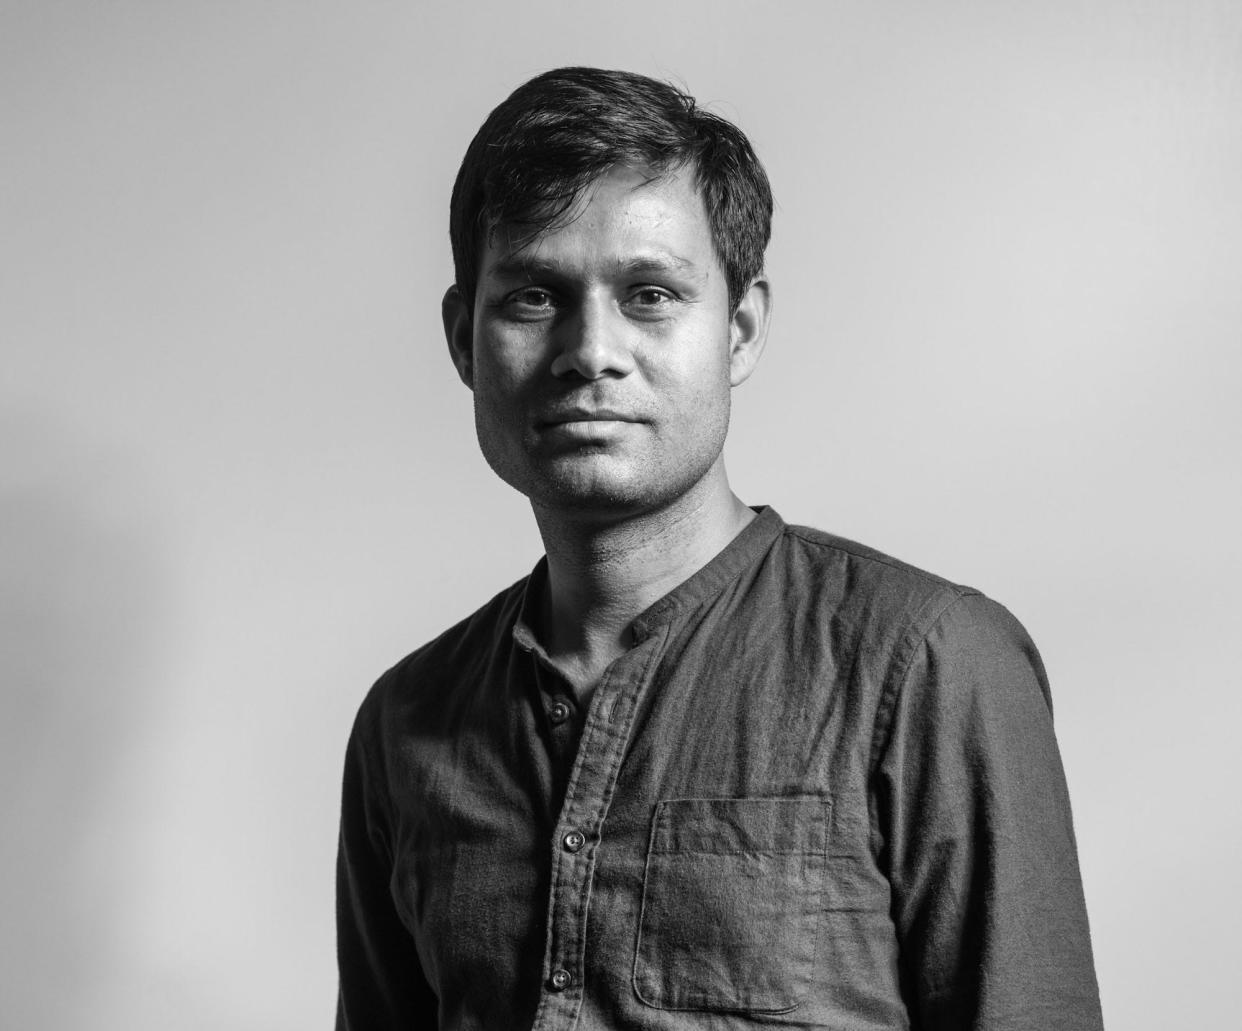 The Nepalese writer, director and producer Deepak Rauniyar is a professor in UNCW's Department of Film Studies.